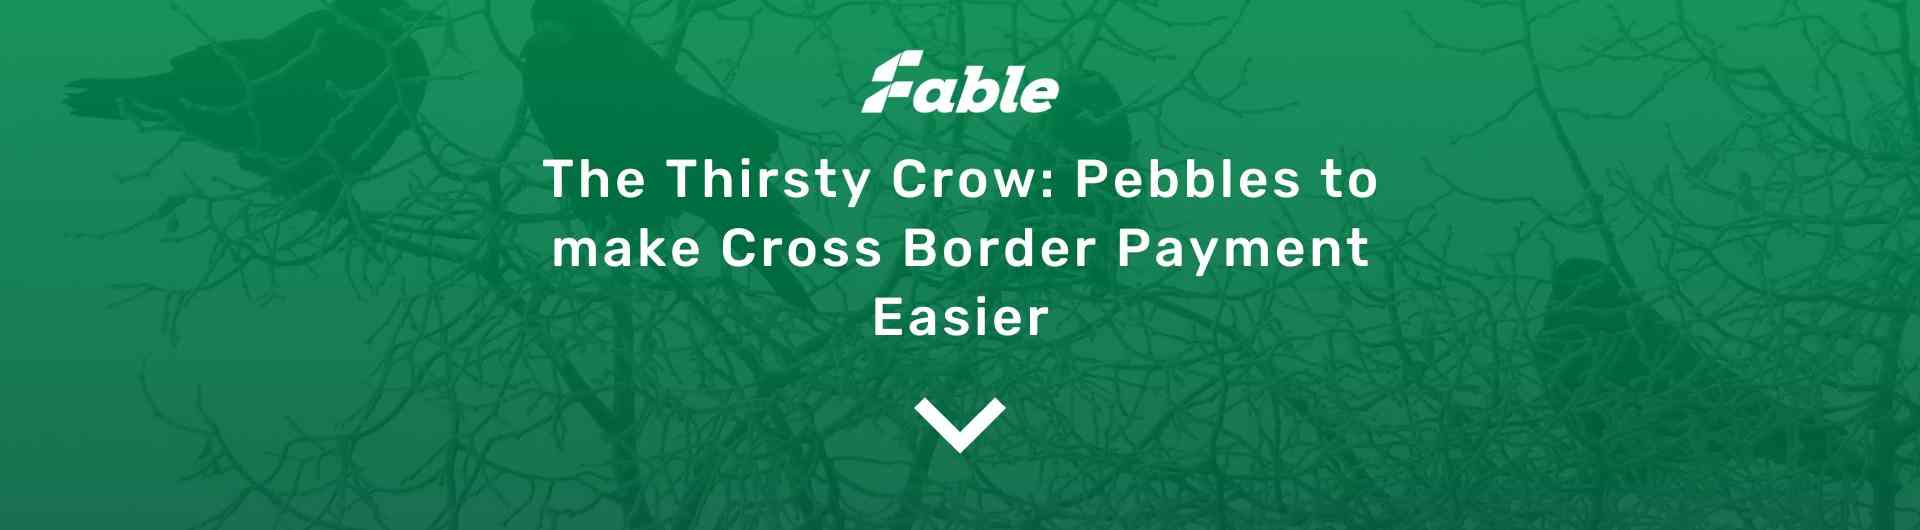 The Thirsty Crow: Pebbles to make Cross Border Payment Easier